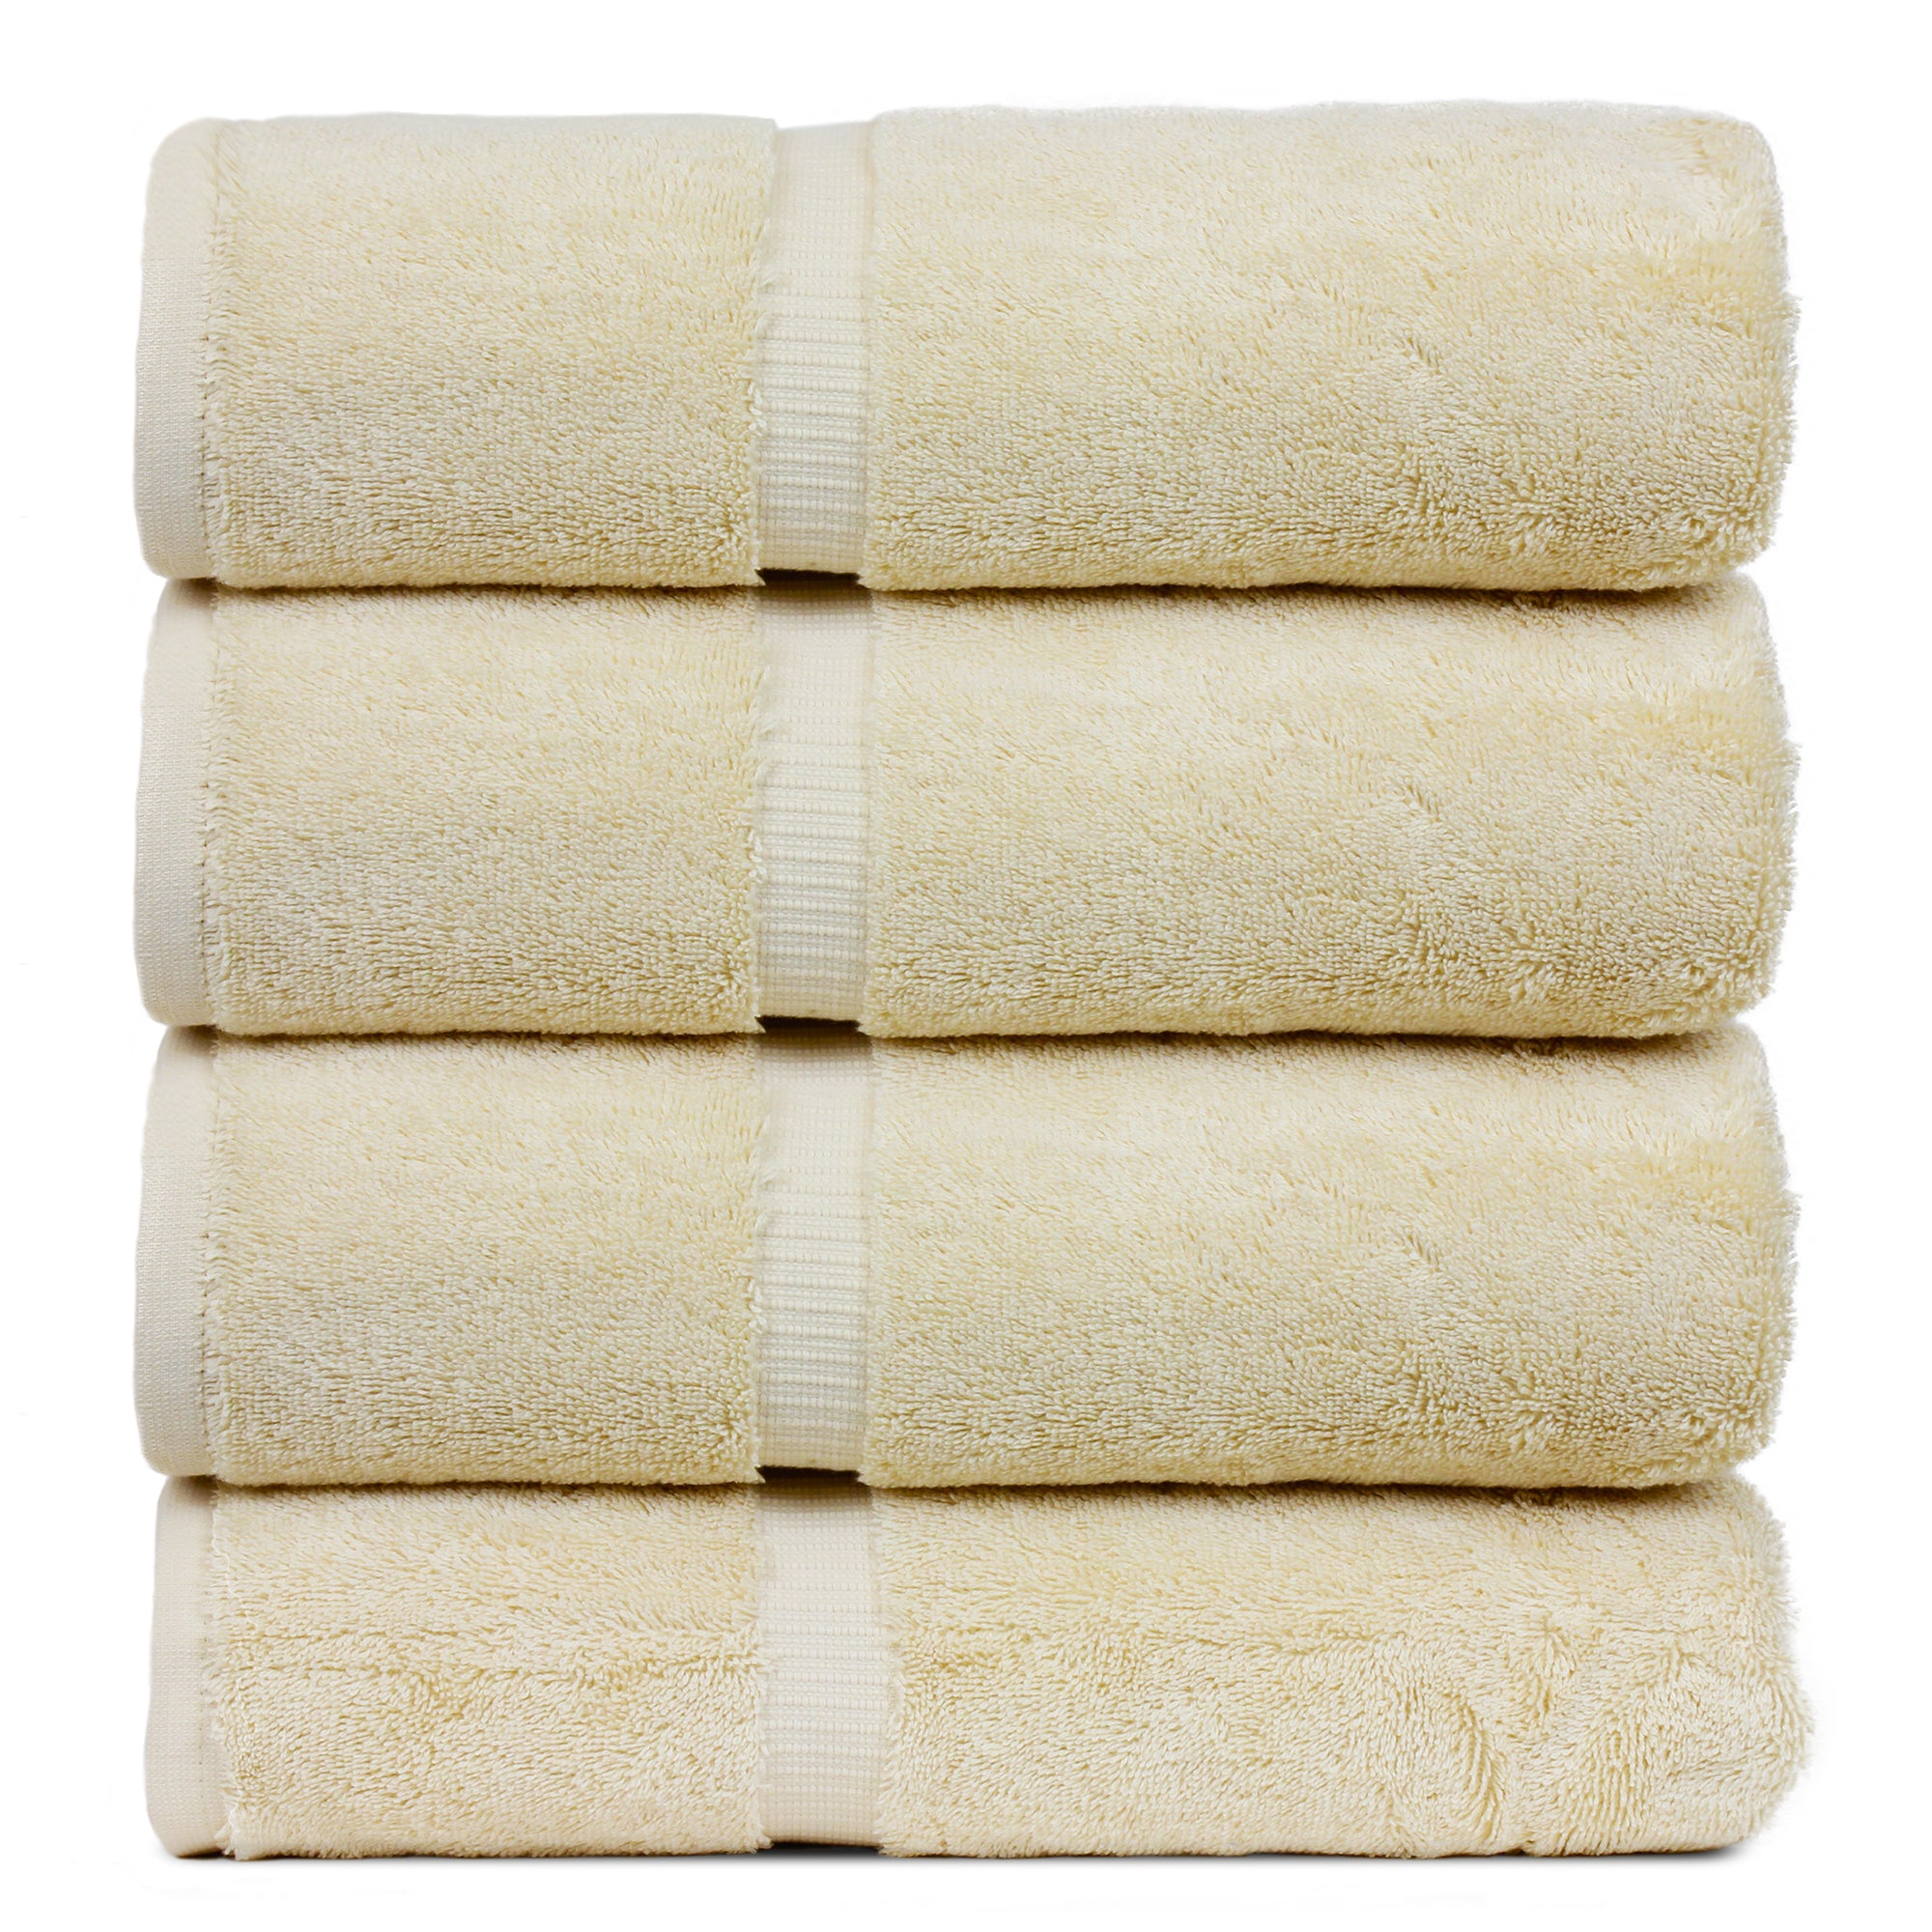 Authentic Hotel and Spa Turkish Cotton Bath Towels (Set of 4) White